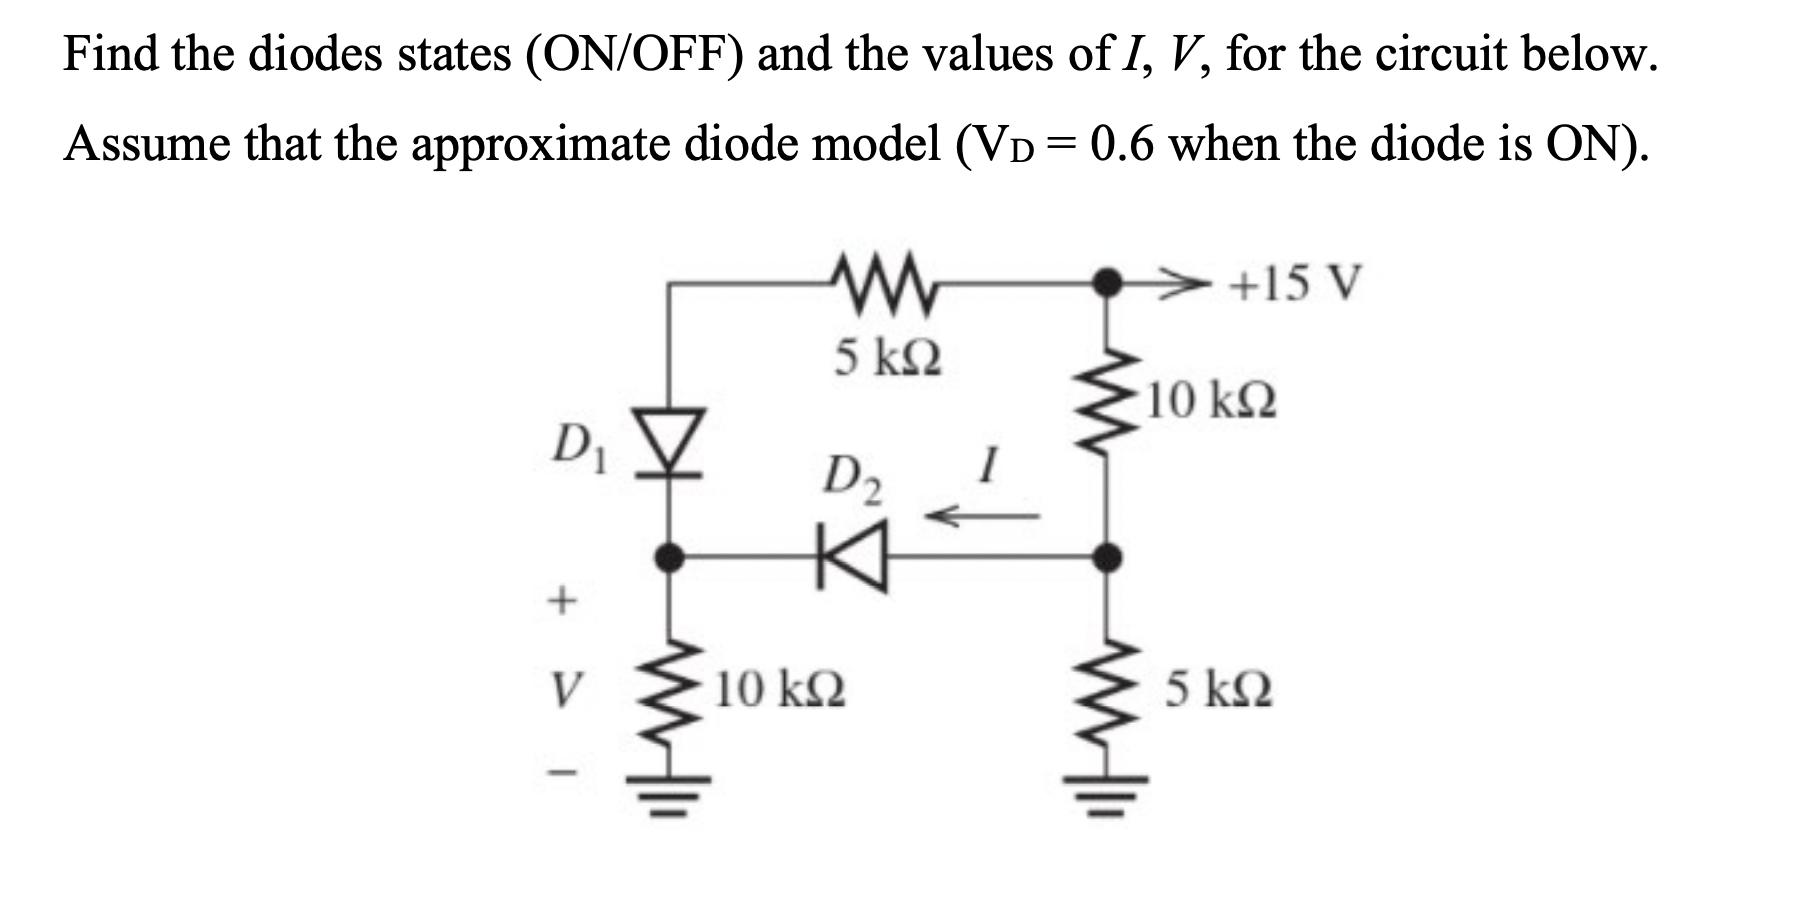 Find the diodes states (ON/OFF) and the values of I, V, for the circuit below. Assume that the approximate